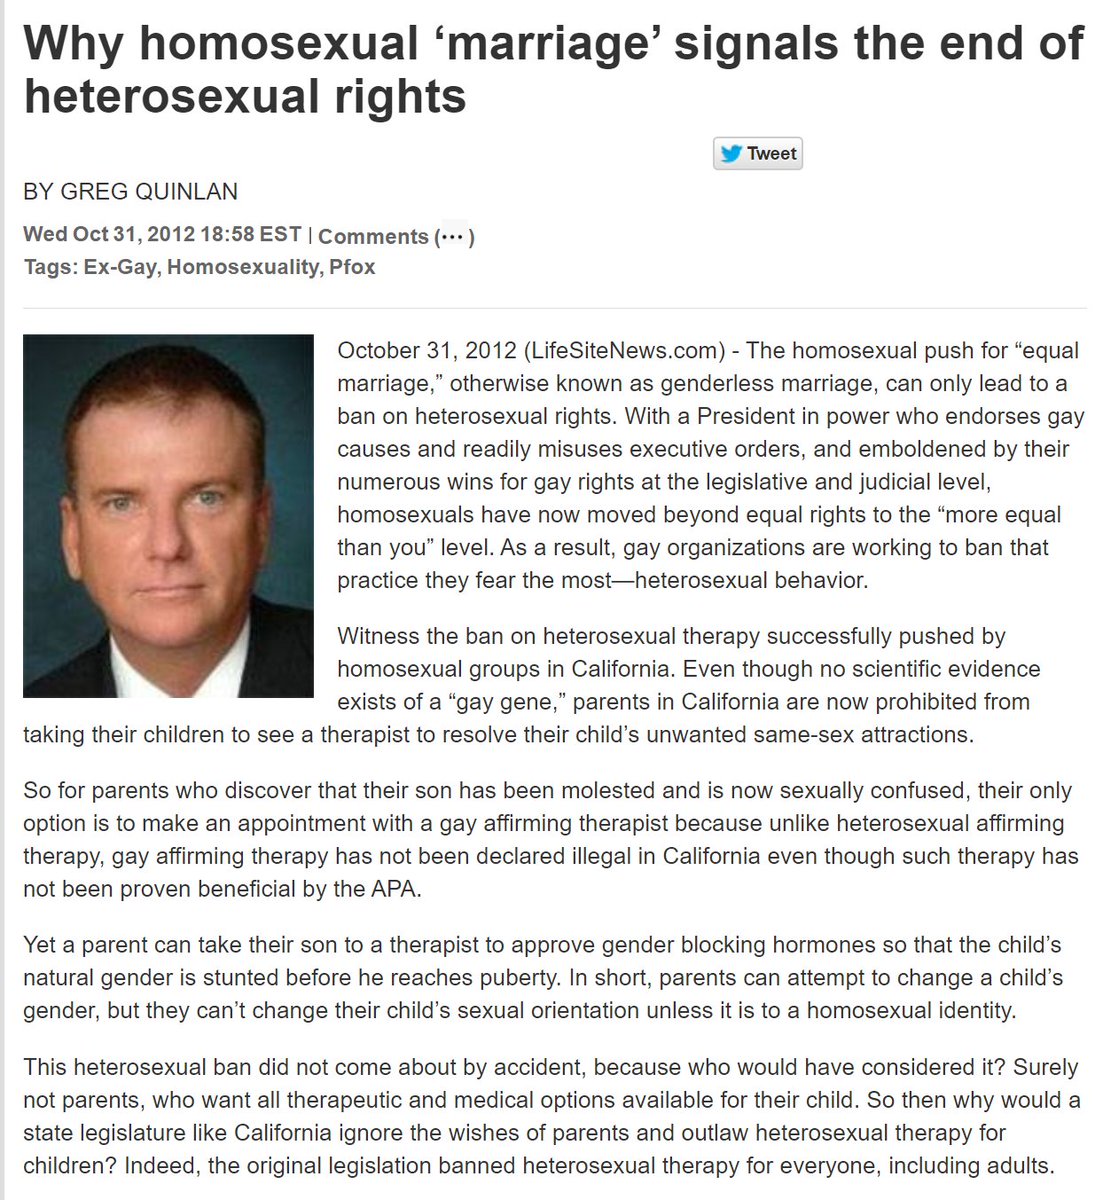 Why homosexual ‘marriage’ signals the end of heterosexual rights, (LifeSiteNews) Oct 31, 2012